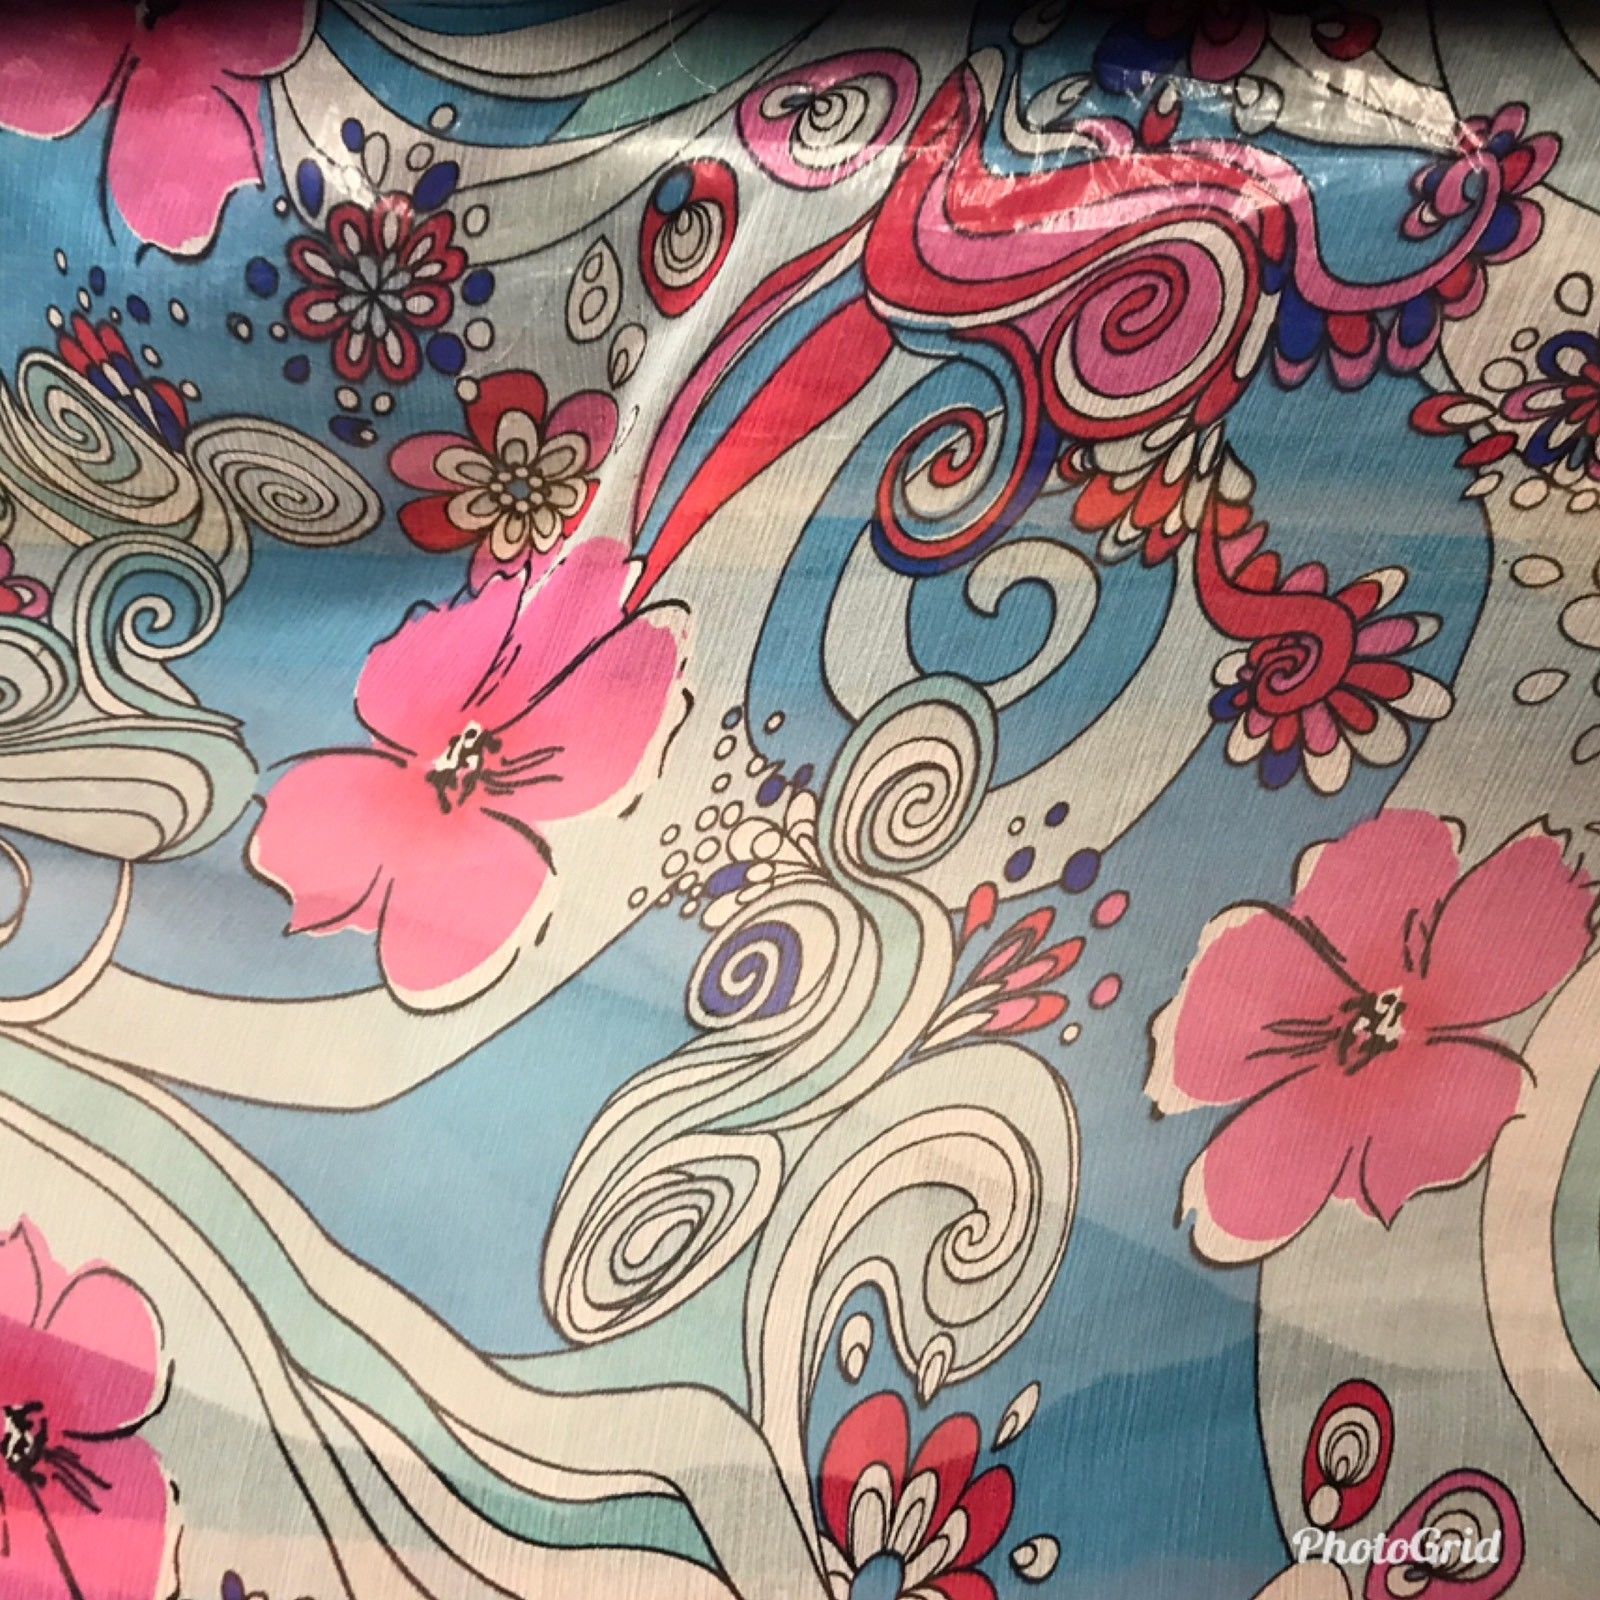 Abstract (Pucci) Wholesale Fabric in Fuchsia